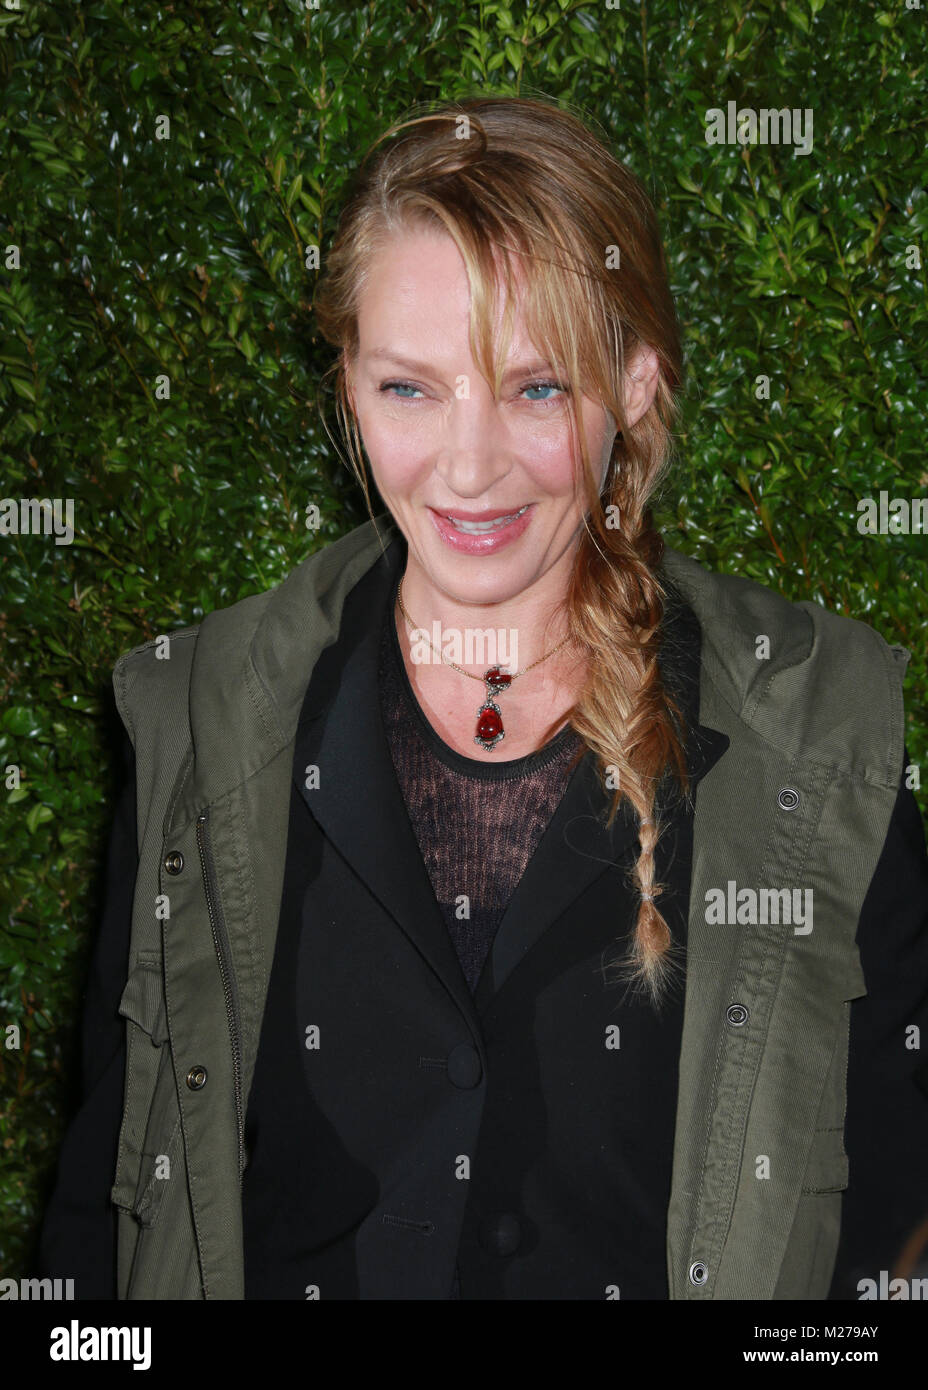 Actress Uma Thurman attends the 2015 Tribeca Film Festival Chanel Artists' Dinner at Balthazar on April 20, 2015 in New York City. Stock Photo